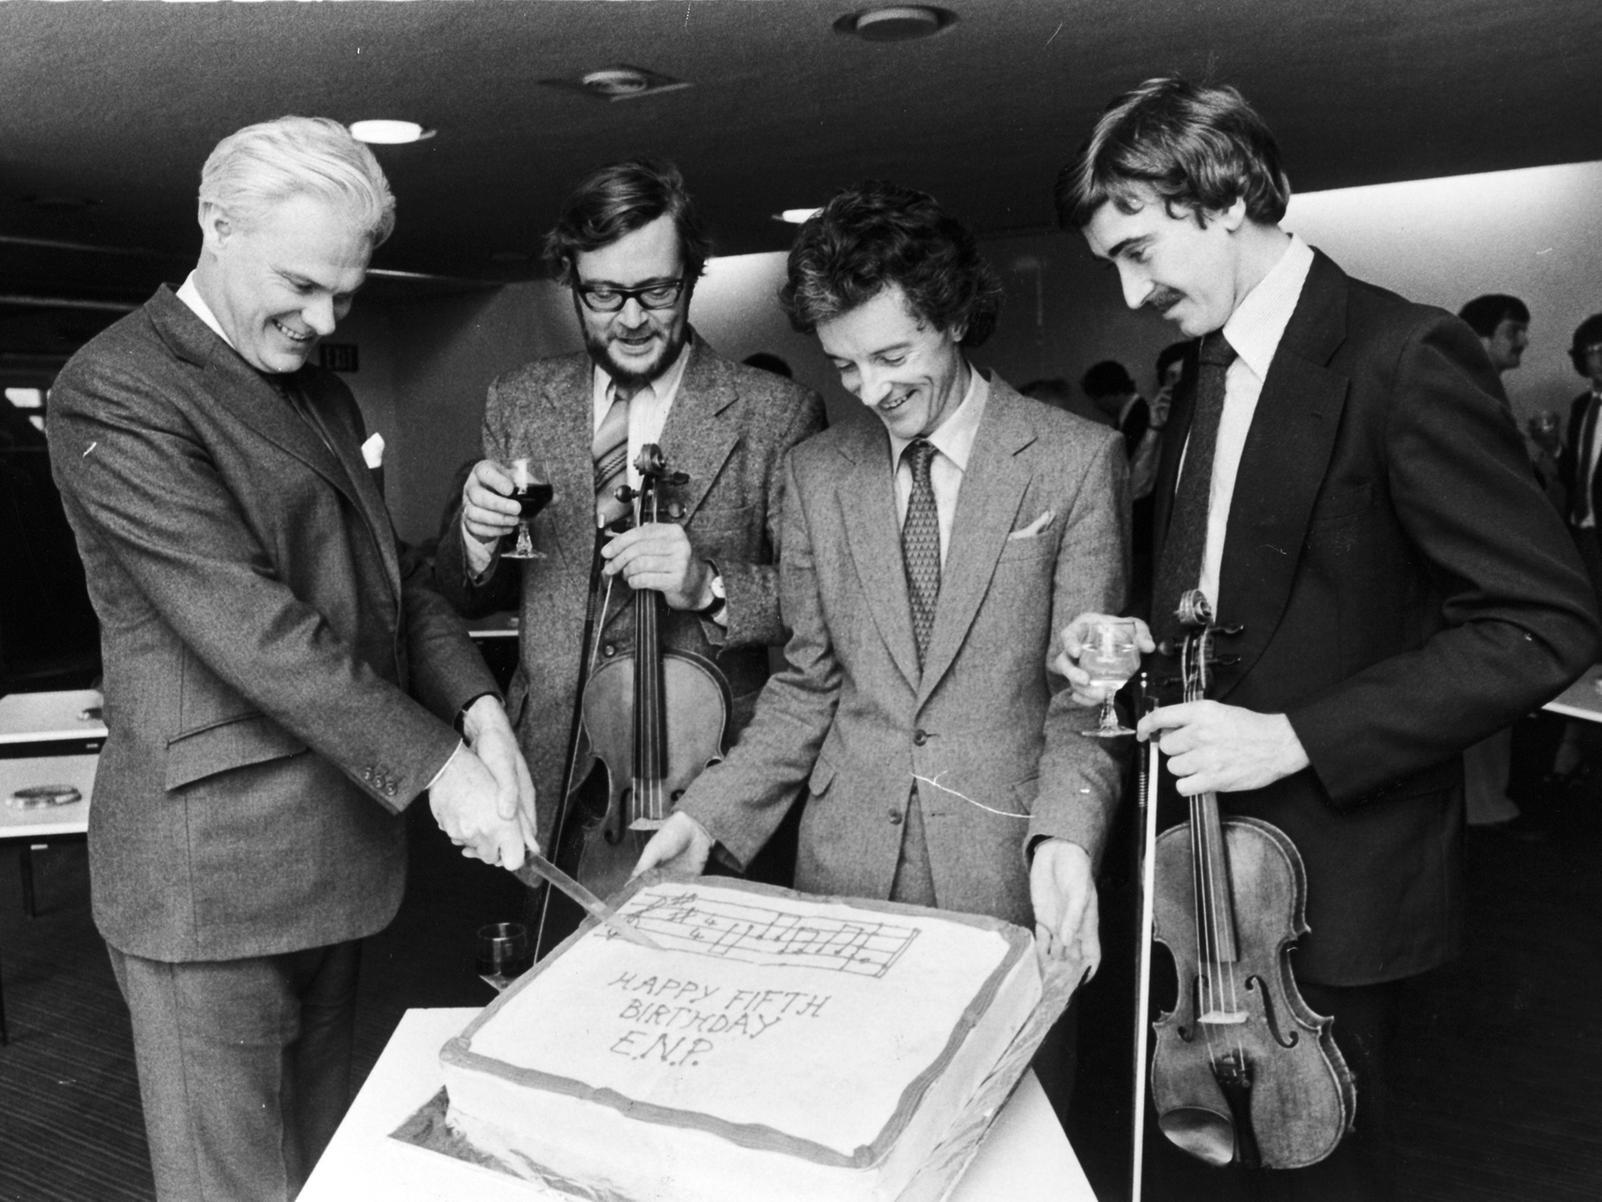 Opera North's orchestra, the English Northern Philharmonia, celebrated its fifth birthday in Leeds. Principal conductor and artistic director David Lloyd-Jones, cuts the cake at Pudsey Civic Hall.